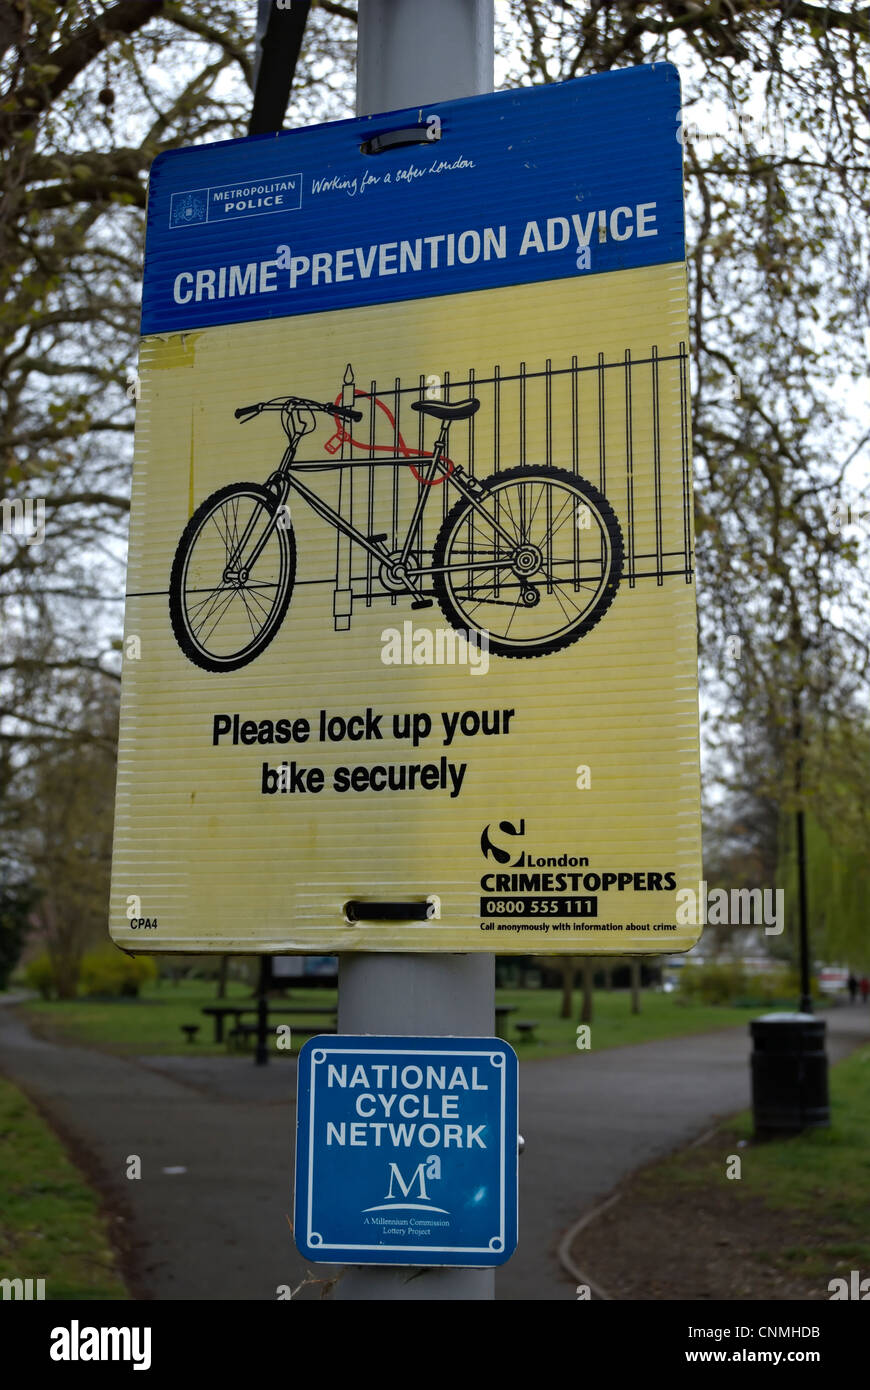 crime prevention sign warning cyclists to lock their bikes securely, in kingston, surrey, england Stock Photo